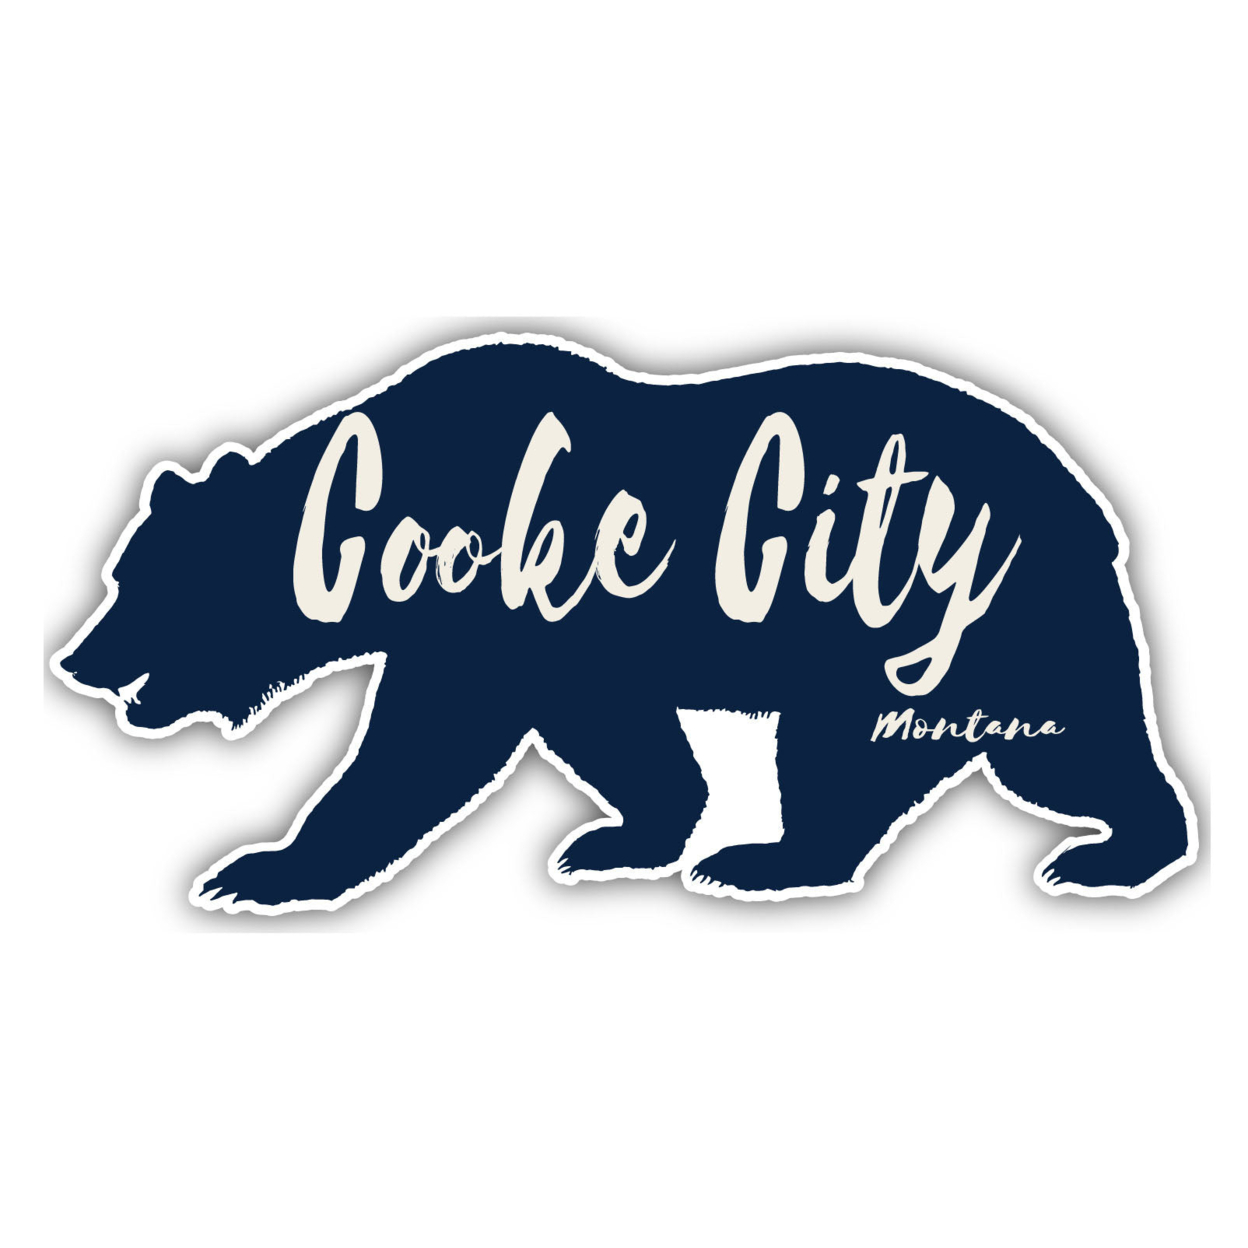 Cooke City Montana Souvenir Decorative Stickers (Choose Theme And Size) - Single Unit, 10-Inch, Great Outdoors